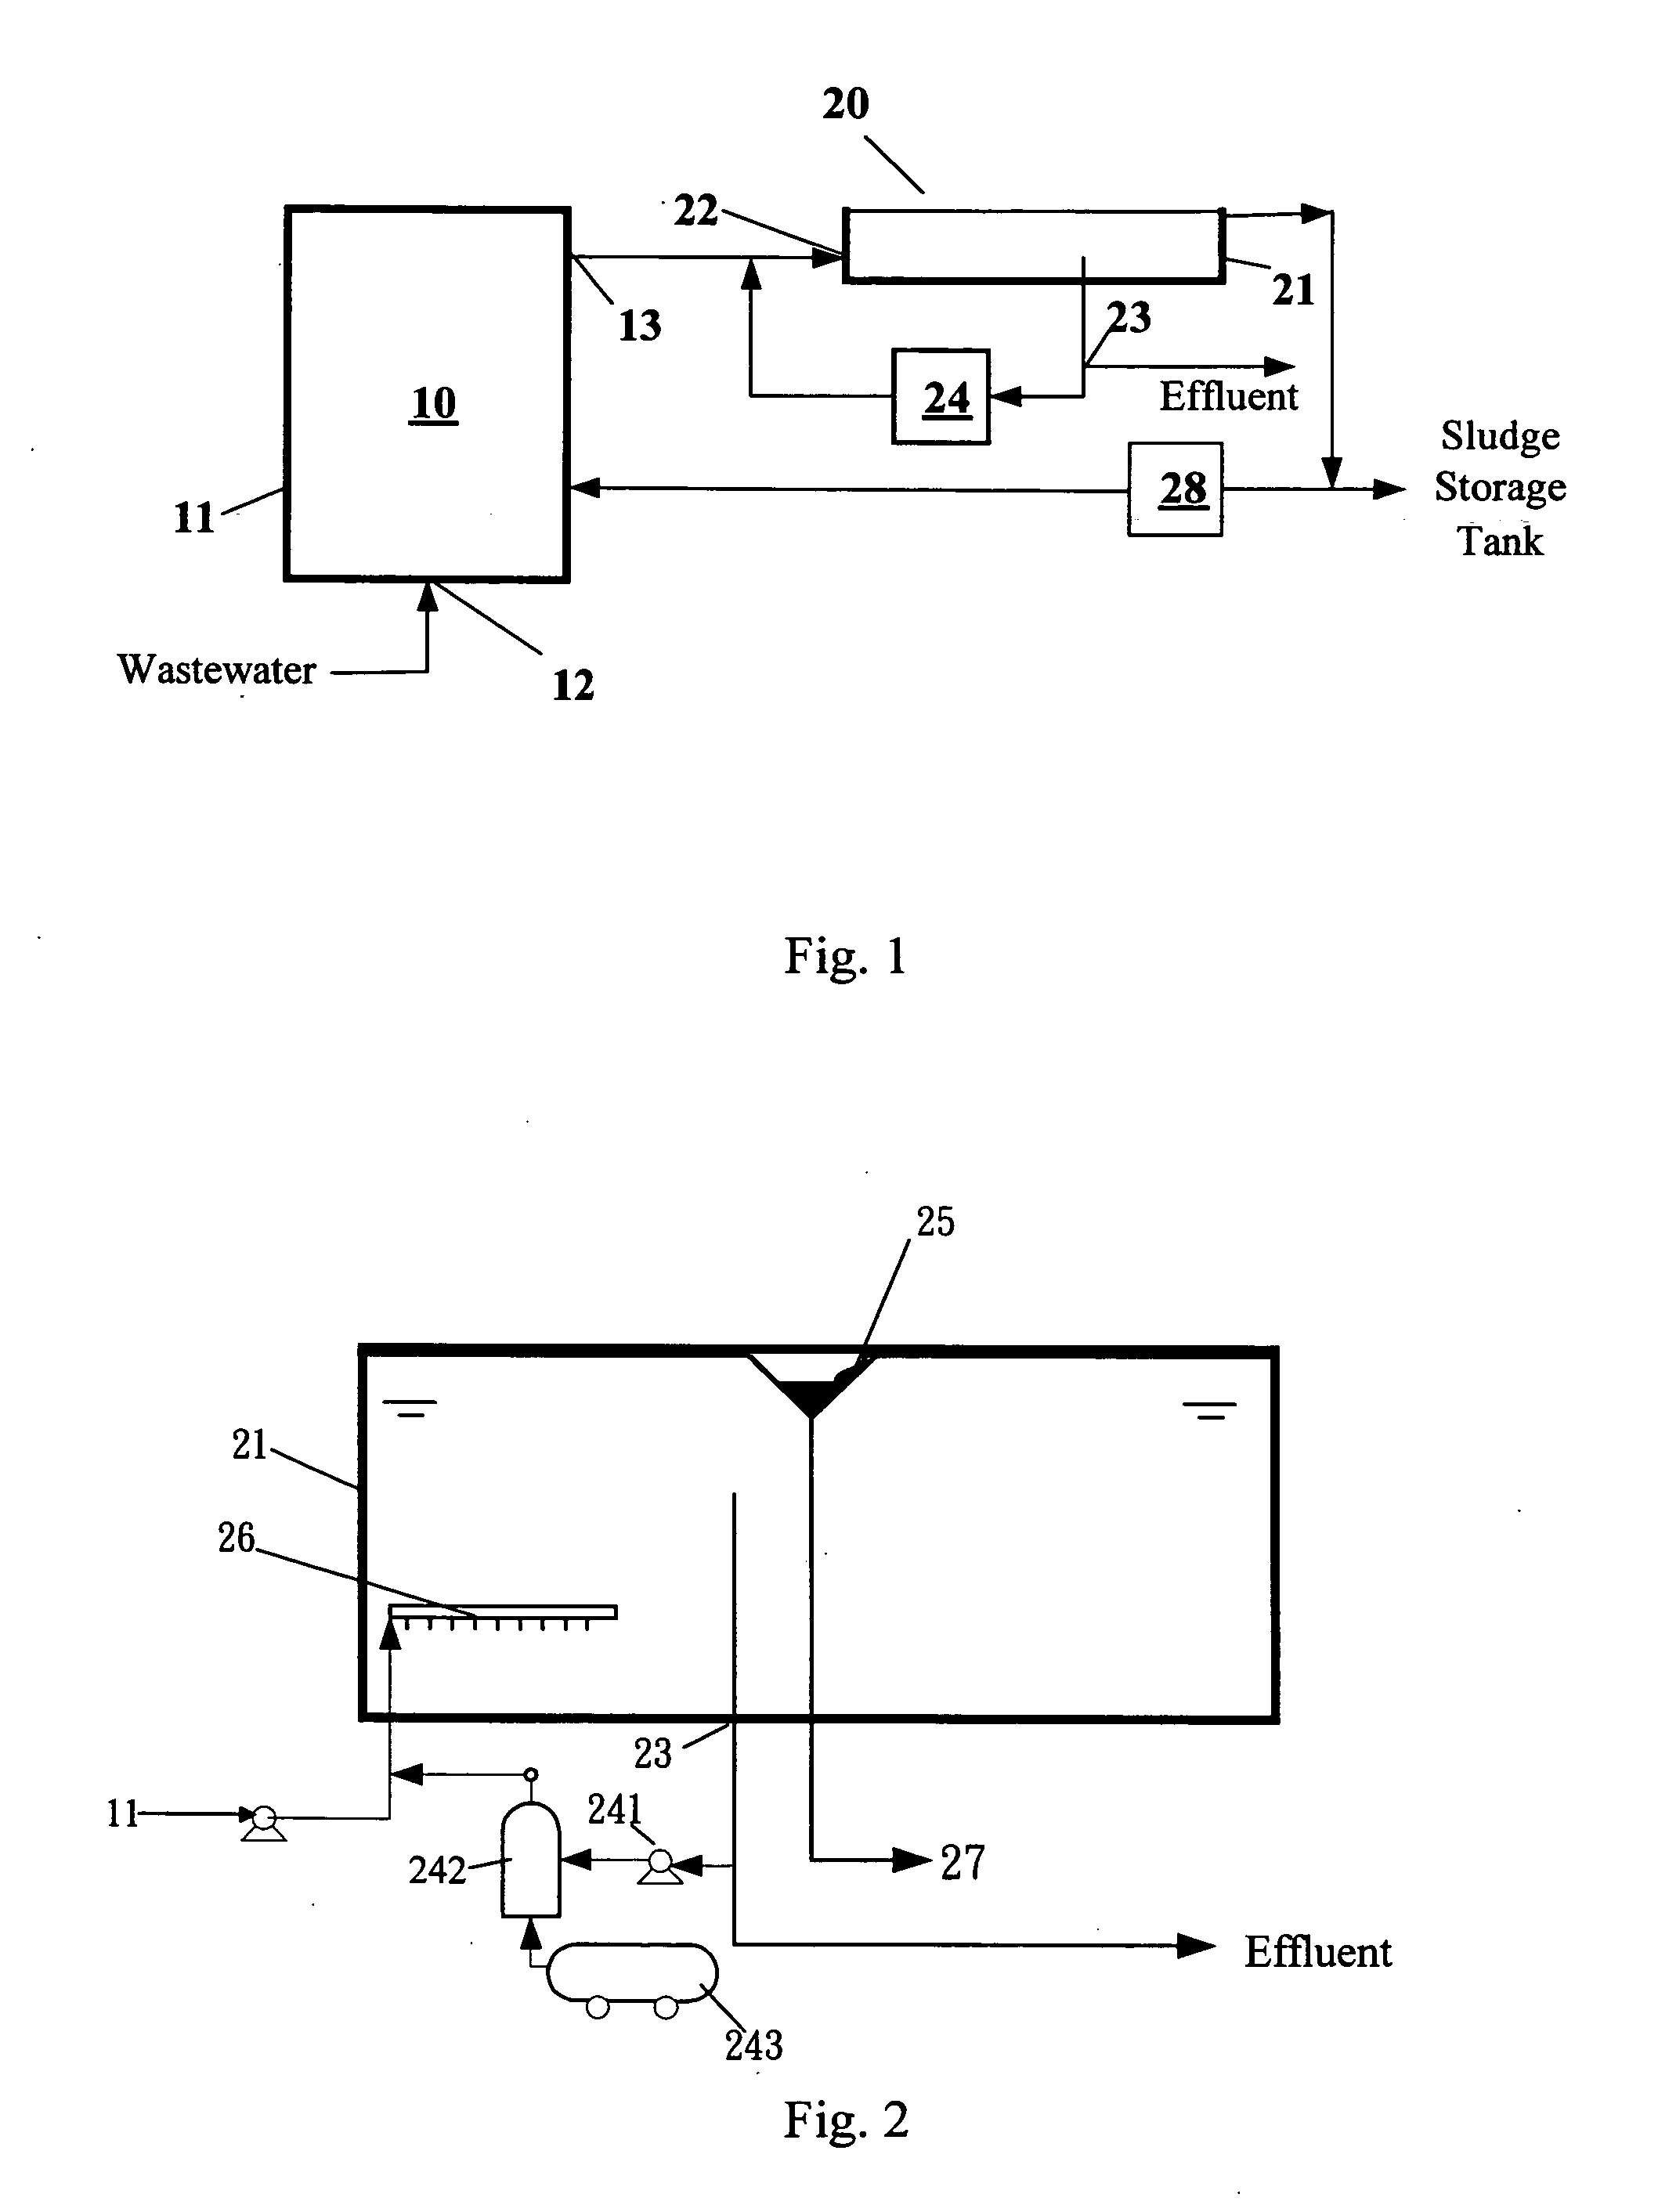 Anaerobic biological wastewater treatment system and process